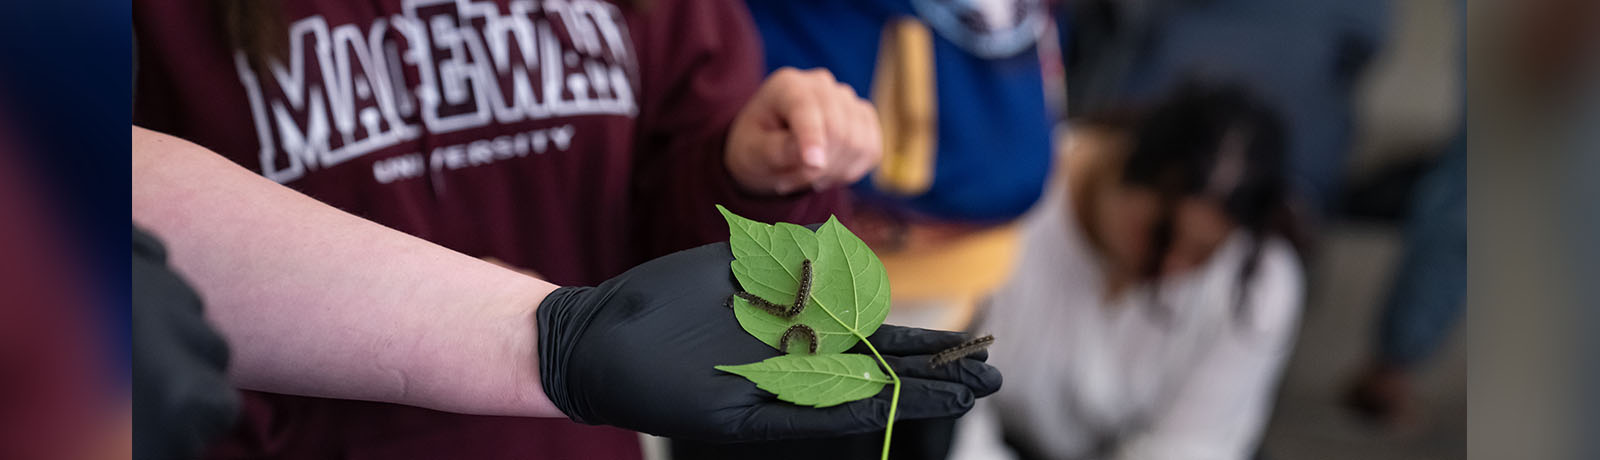 A MacEwan student holds a caterpillar and leaves in a gloved hand while a younger student wearing a MacEwan hoodie holds out a finger to touch it